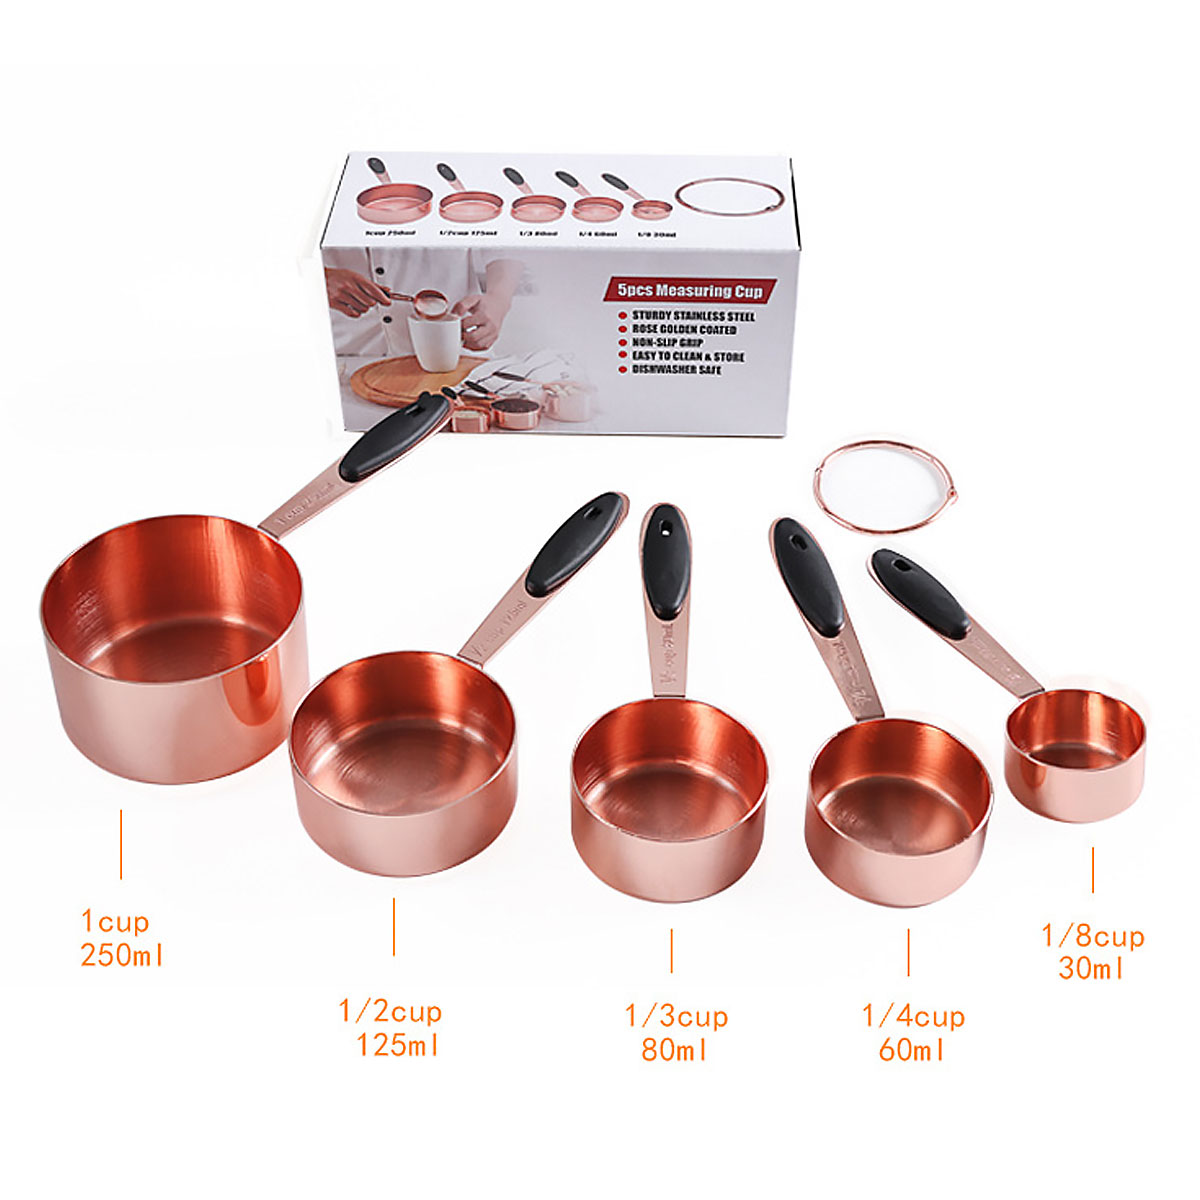 5Pcs-Measuring-Cup-Set-Stainless-Steel-Kitchen-Accessories-Baking-Bartending-Tools-1722150